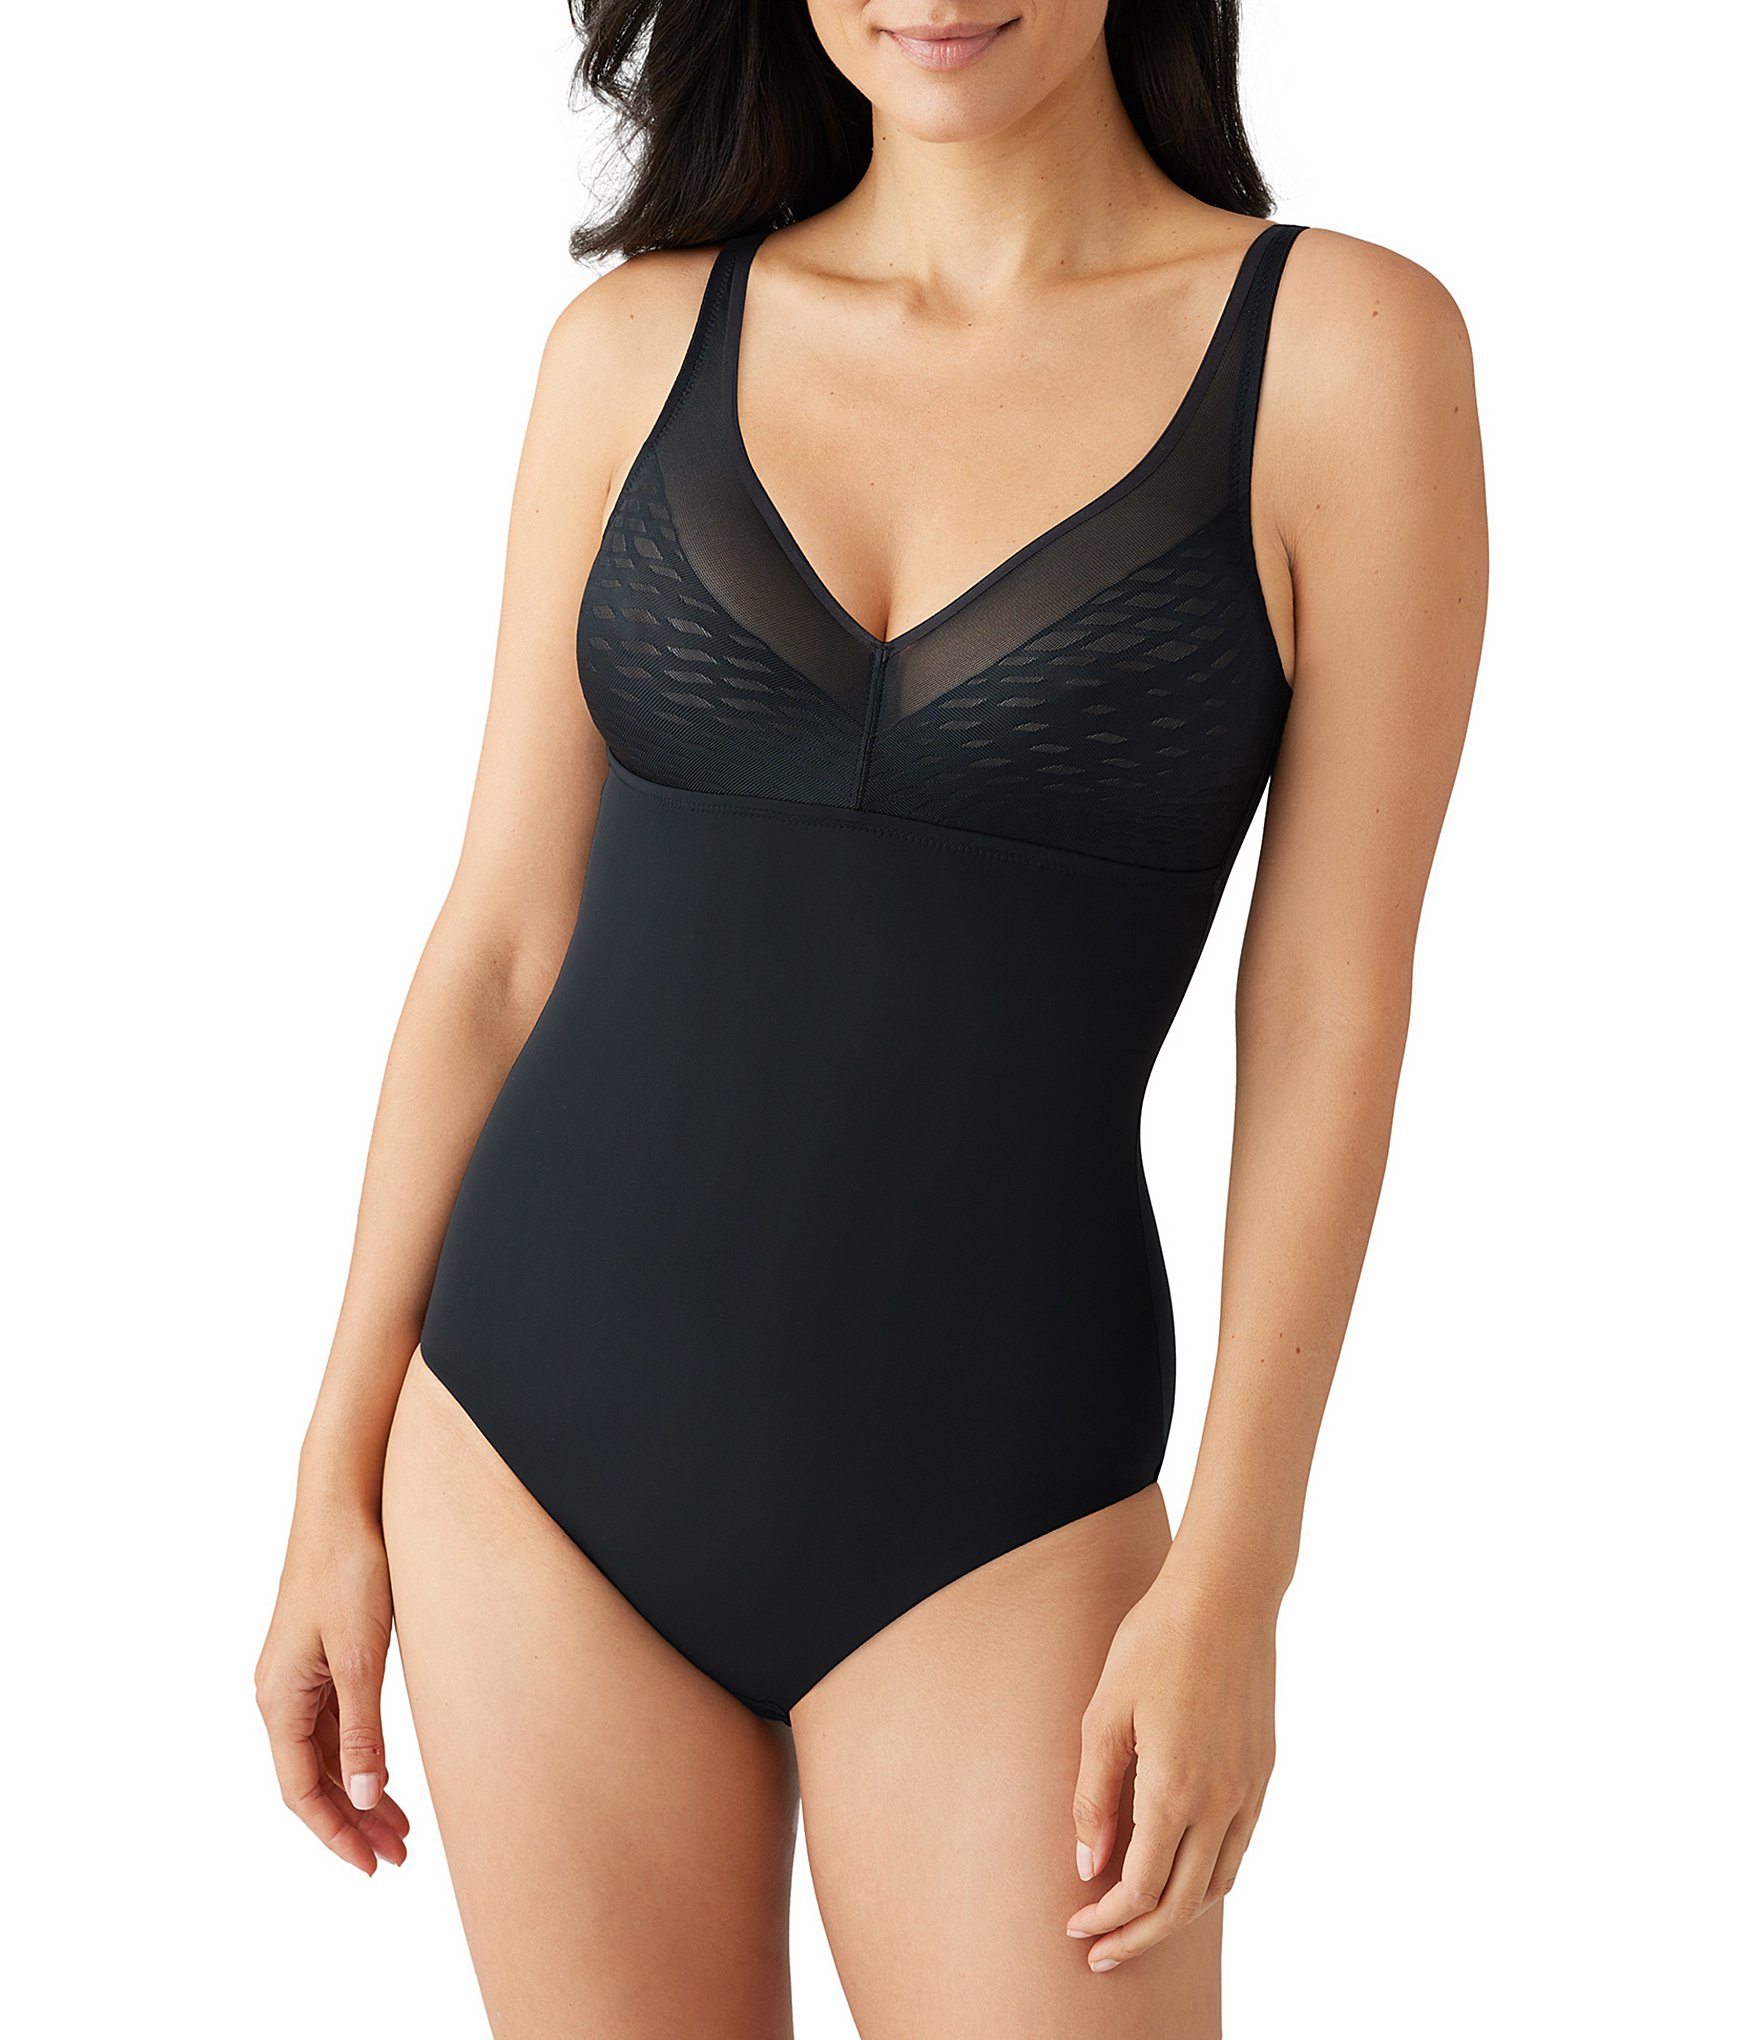 Wacoal Elevated Allure Wirefree Shaping Body Briefer